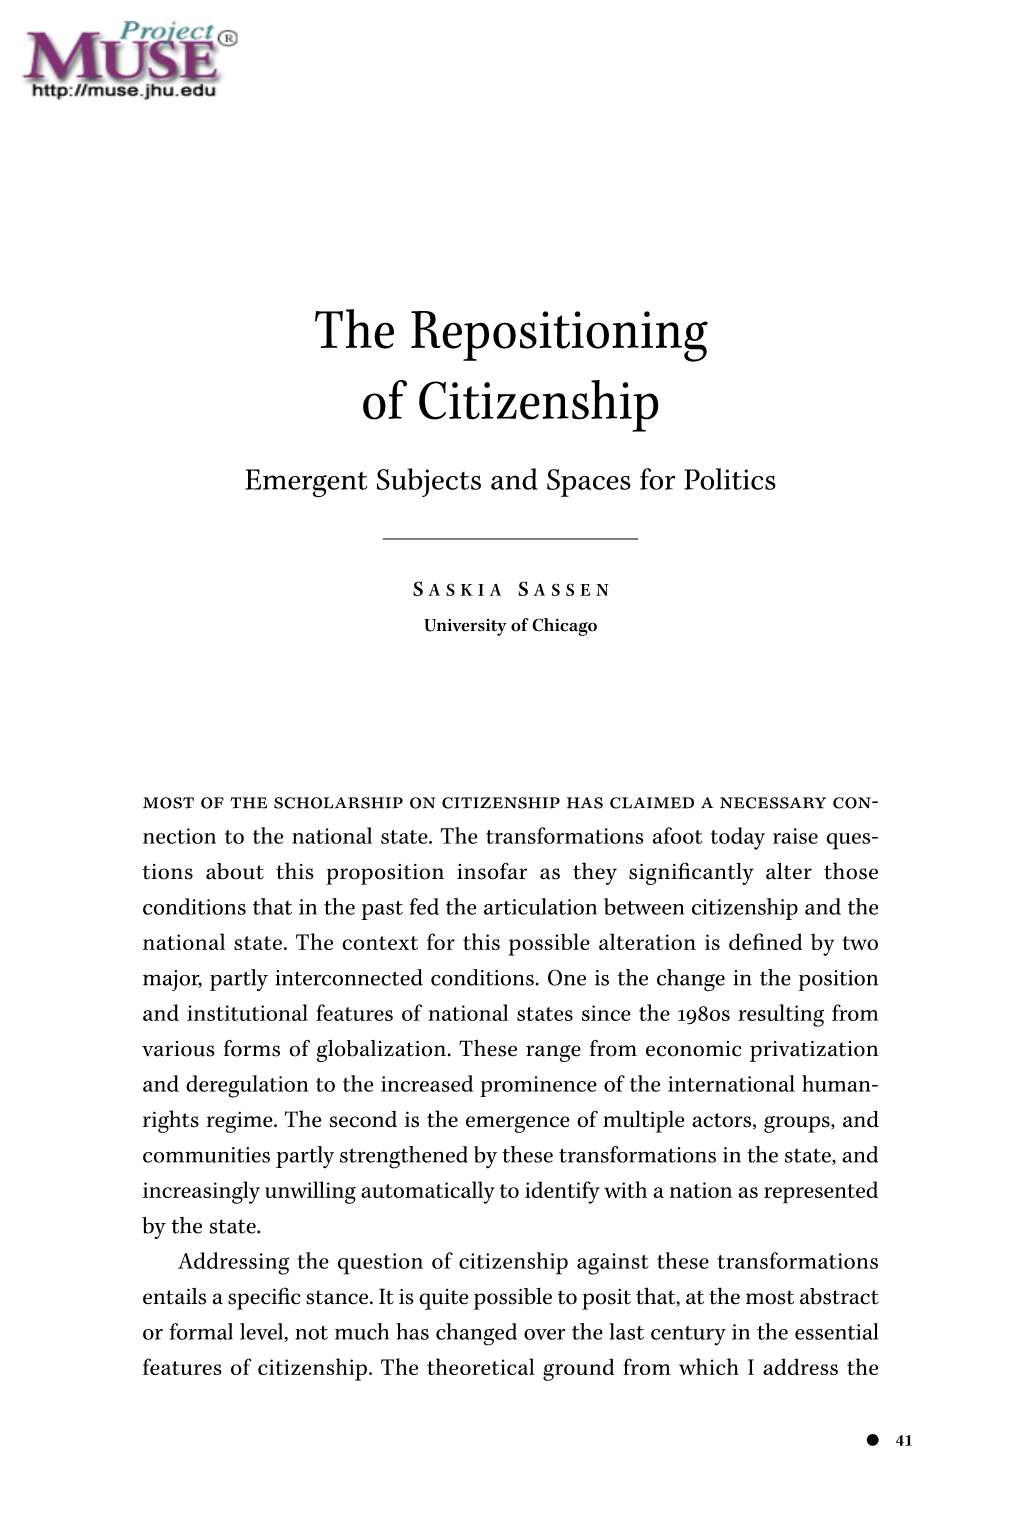 The Repositioning of Citizenship